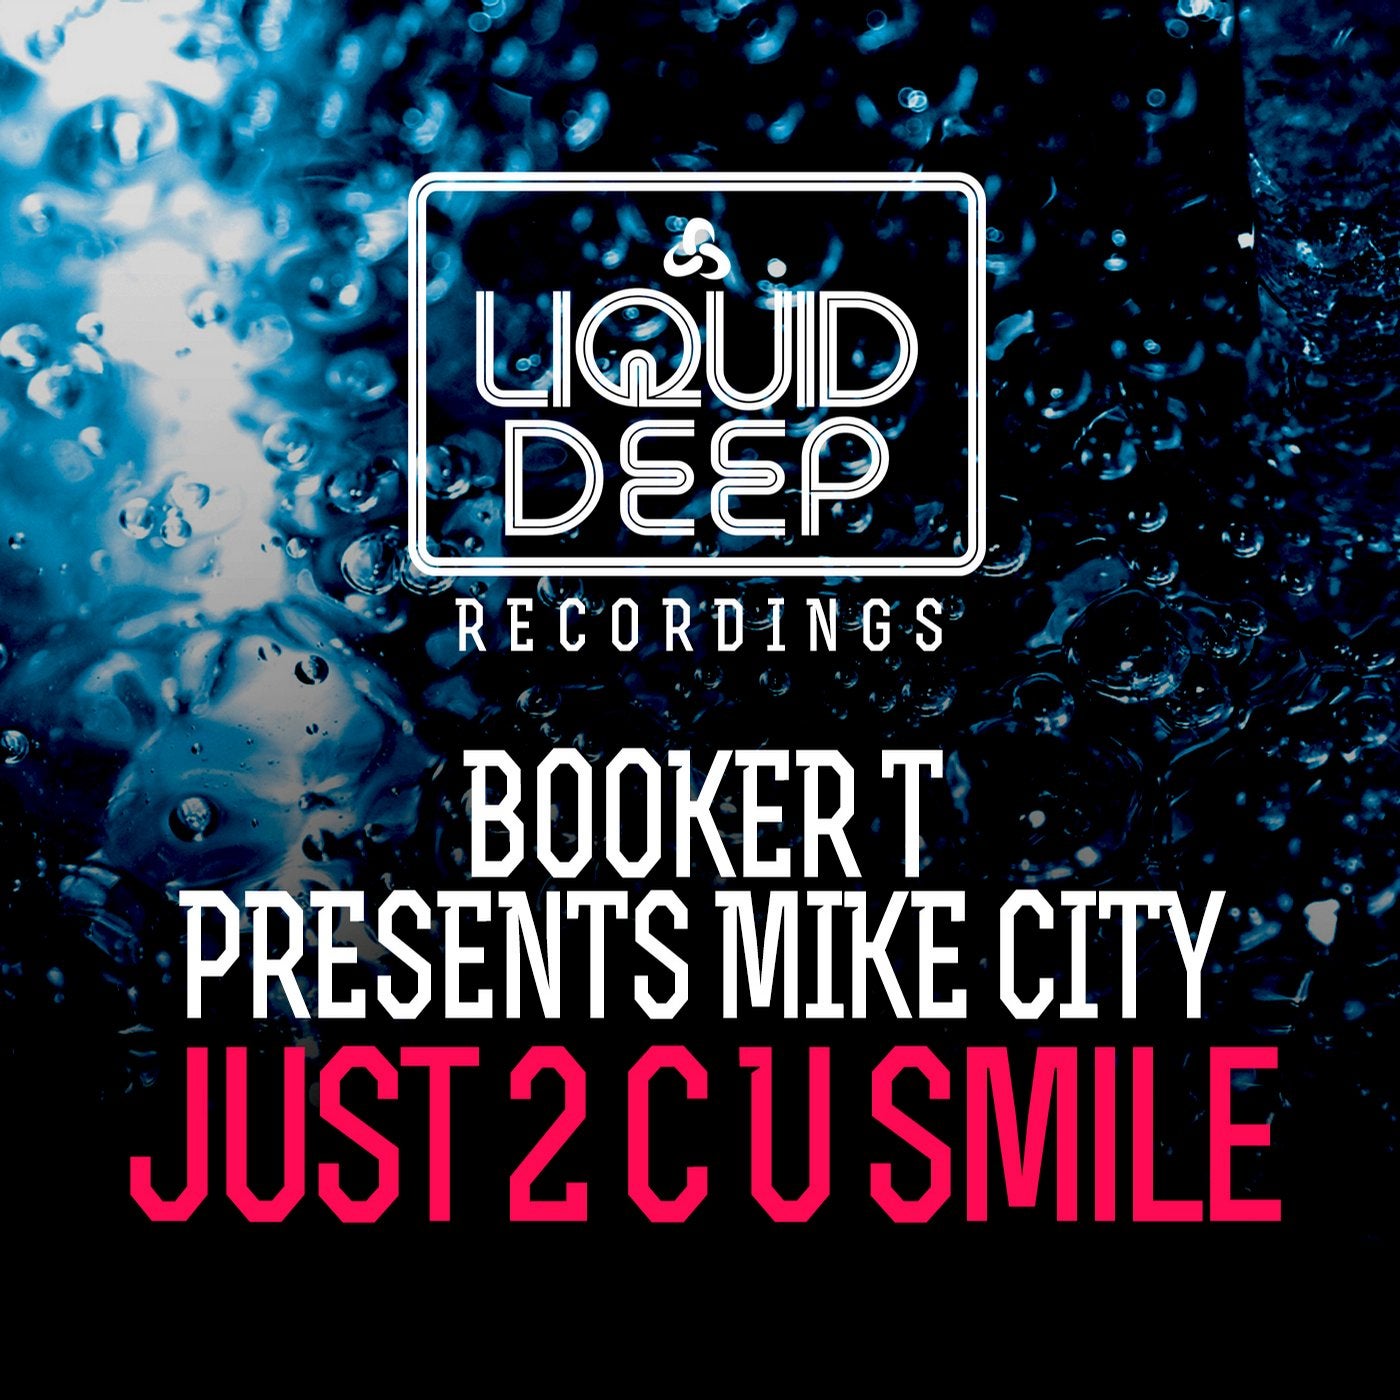 Just 2 C U Smile [Presented by Booker T]